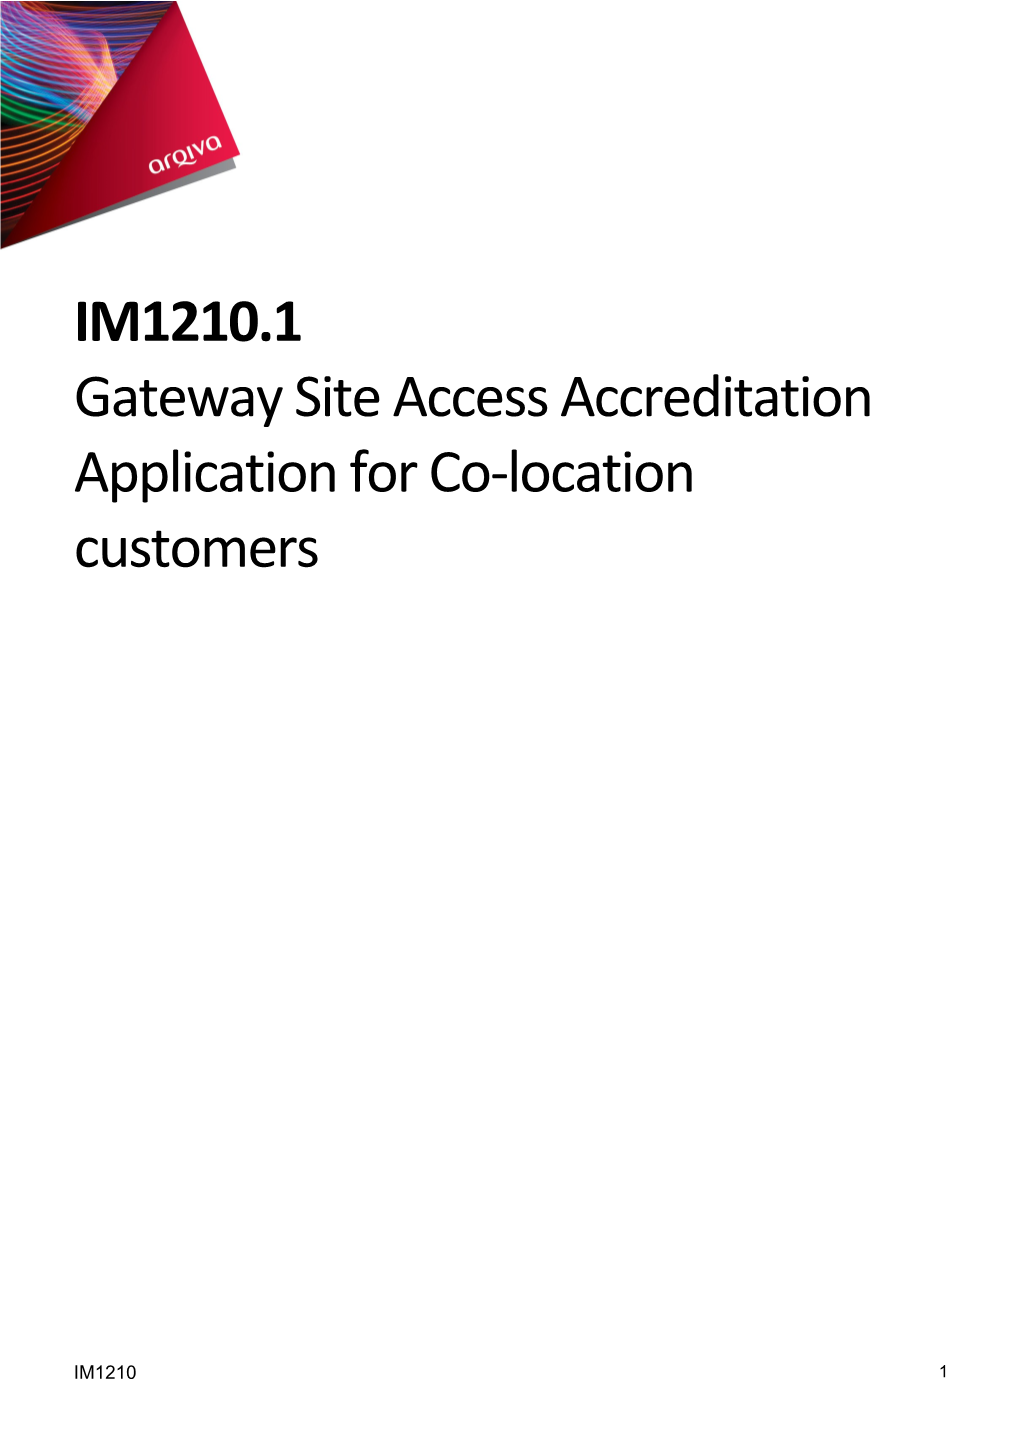 Gateway Site Access Accreditation Application Forco-Location Customers